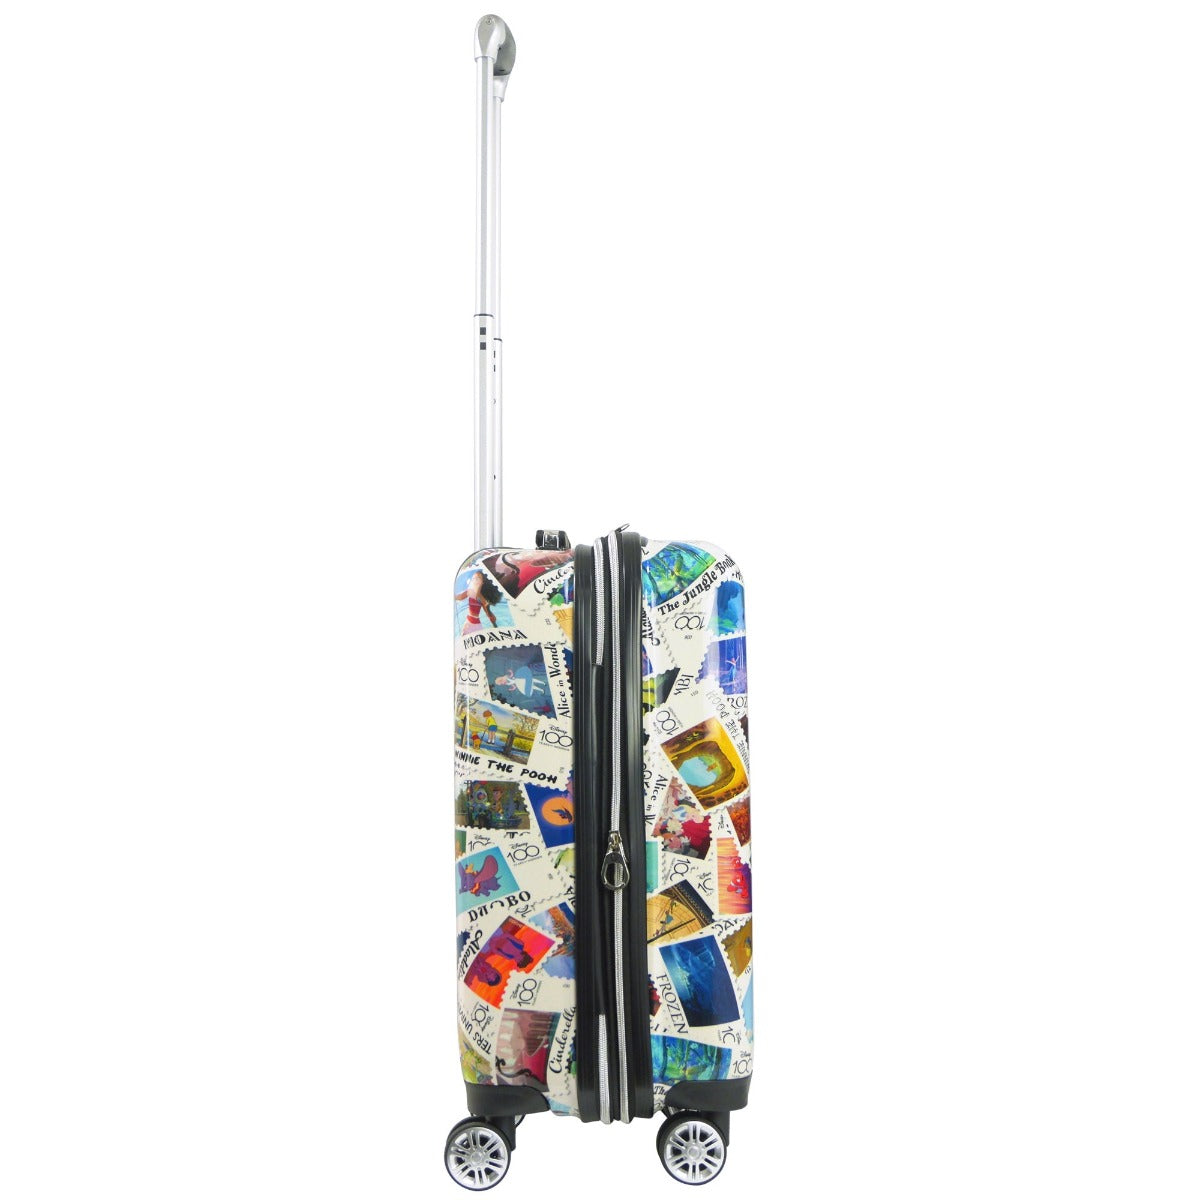 Ful Disney 100 Year Anniversary Stamps ABS Hardsided Spinner Suitcase 22 inch carry-on Luggage 360 spinner wheels Limited Edition 